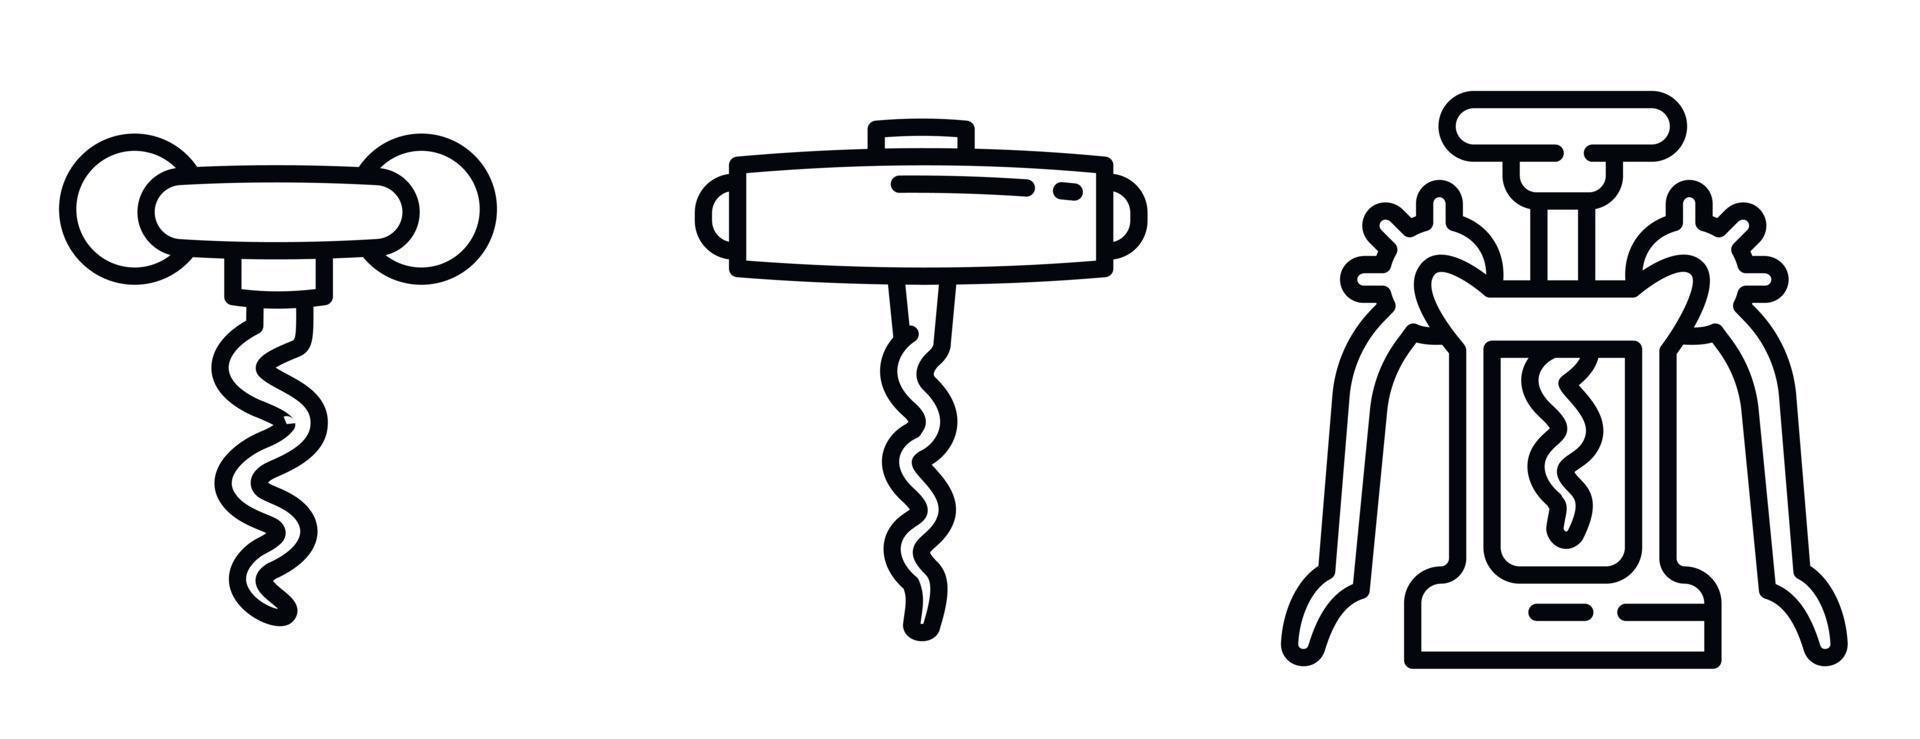 Corkscrew icons set, outline style vector